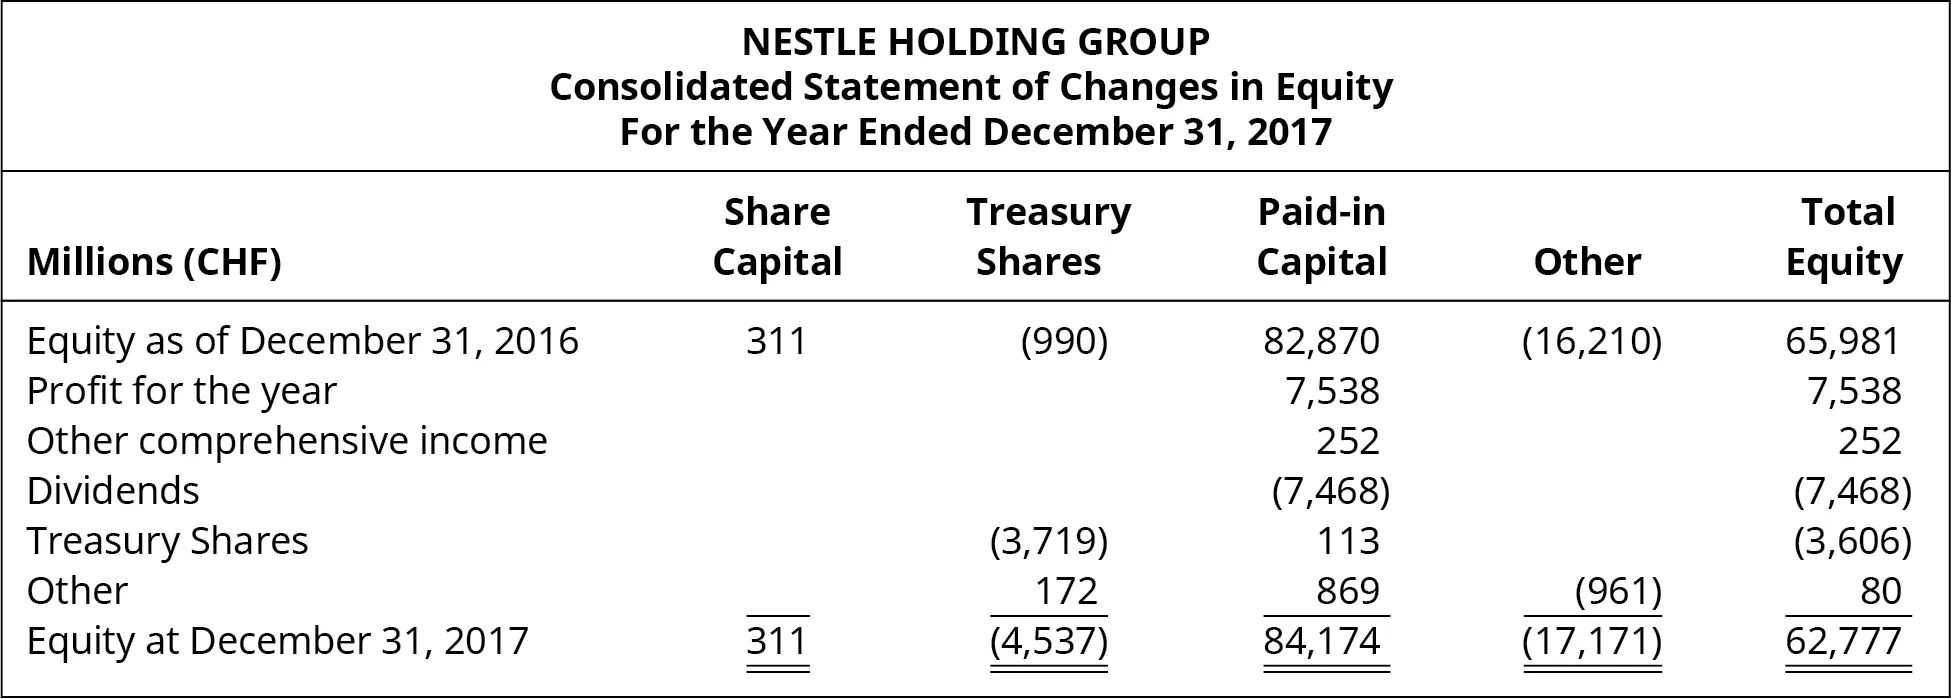 Nestle Holding Group, Consolidated Statement of Changes in Equity, For the Year Ended December 31, 2017. Millions (CHF), Share Capital, Treasury Shares, Paid-in Capital, Other, Total Equity (respectively): Equity as of December 31, 2016, 311, (990), 82,870, (16,210) 65,981. Profit for the year, -, -, 7,538, -, 7,538. Other comprehensive income, -, -, 252, -, 252. Dividends, -, -, (7,468), -, (7,468). Treasury shares, -, (3,719), 113, -, (3,606). Other, -, 172, 869, (961), 80. Equity at December 31, 2017, 311, (4,537), 84,174, (17,171), 62,777.